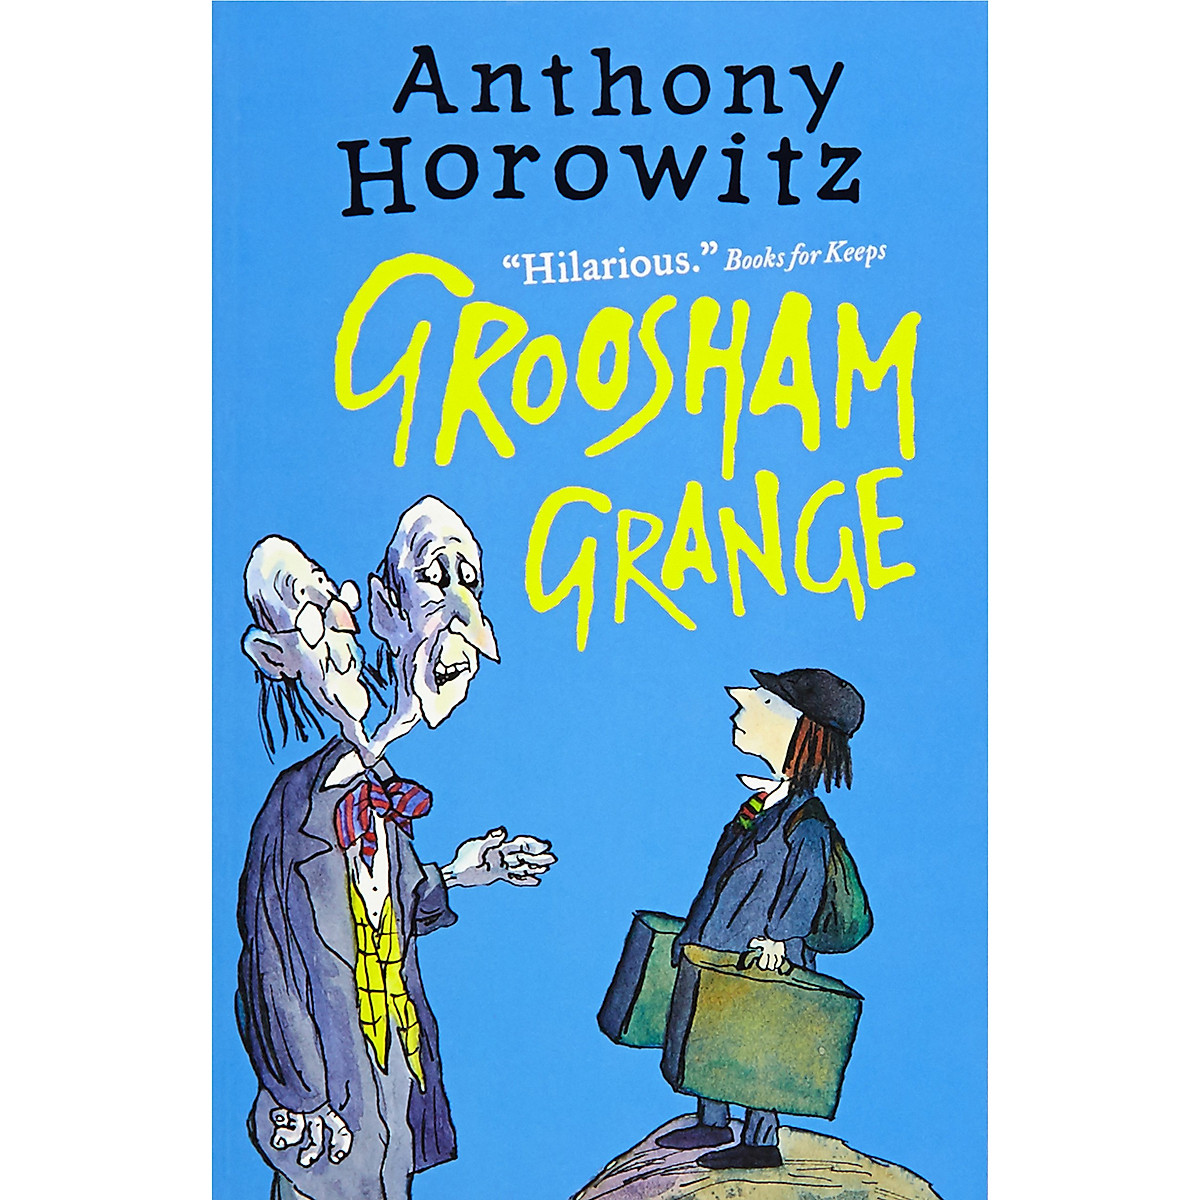 Sách tiếng Anh - The Wickedly Funny Anthony Horowitz: Groosham Grance